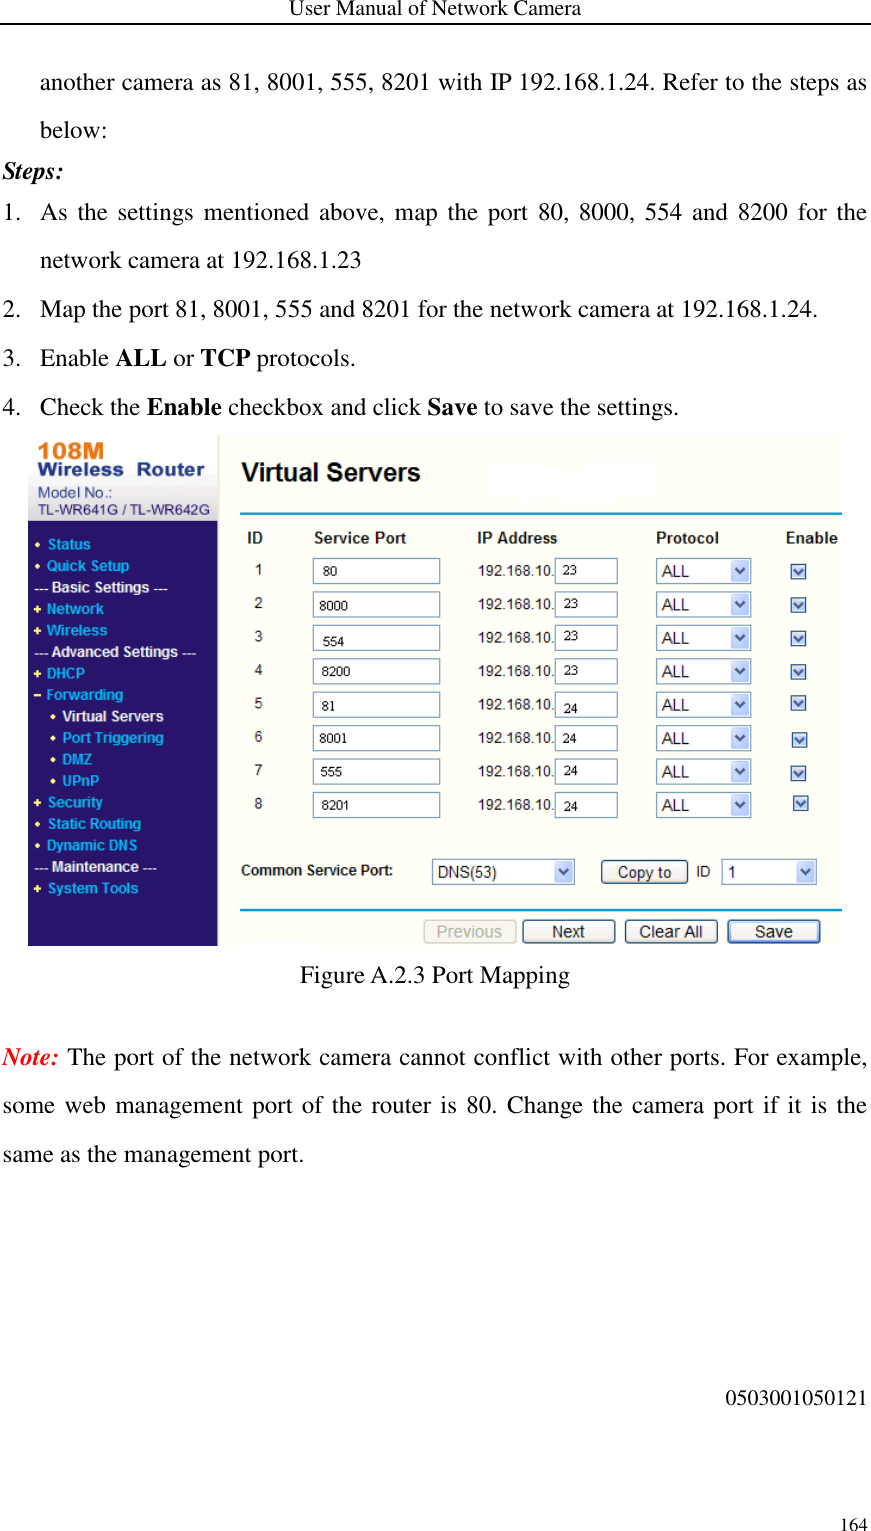 User Manual of Network Camera 164  another camera as 81, 8001, 555, 8201 with IP 192.168.1.24. Refer to the steps as below: Steps: 1. As the  settings mentioned above,  map the port  80,  8000, 554 and 8200  for the network camera at 192.168.1.23 2. Map the port 81, 8001, 555 and 8201 for the network camera at 192.168.1.24.   3. Enable ALL or TCP protocols. 4. Check the Enable checkbox and click Save to save the settings.  Figure A.2.3 Port Mapping  Note: The port of the network camera cannot conflict with other ports. For example, some web management port of the router is 80. Change the camera port if it is the same as the management port.     0503001050121  